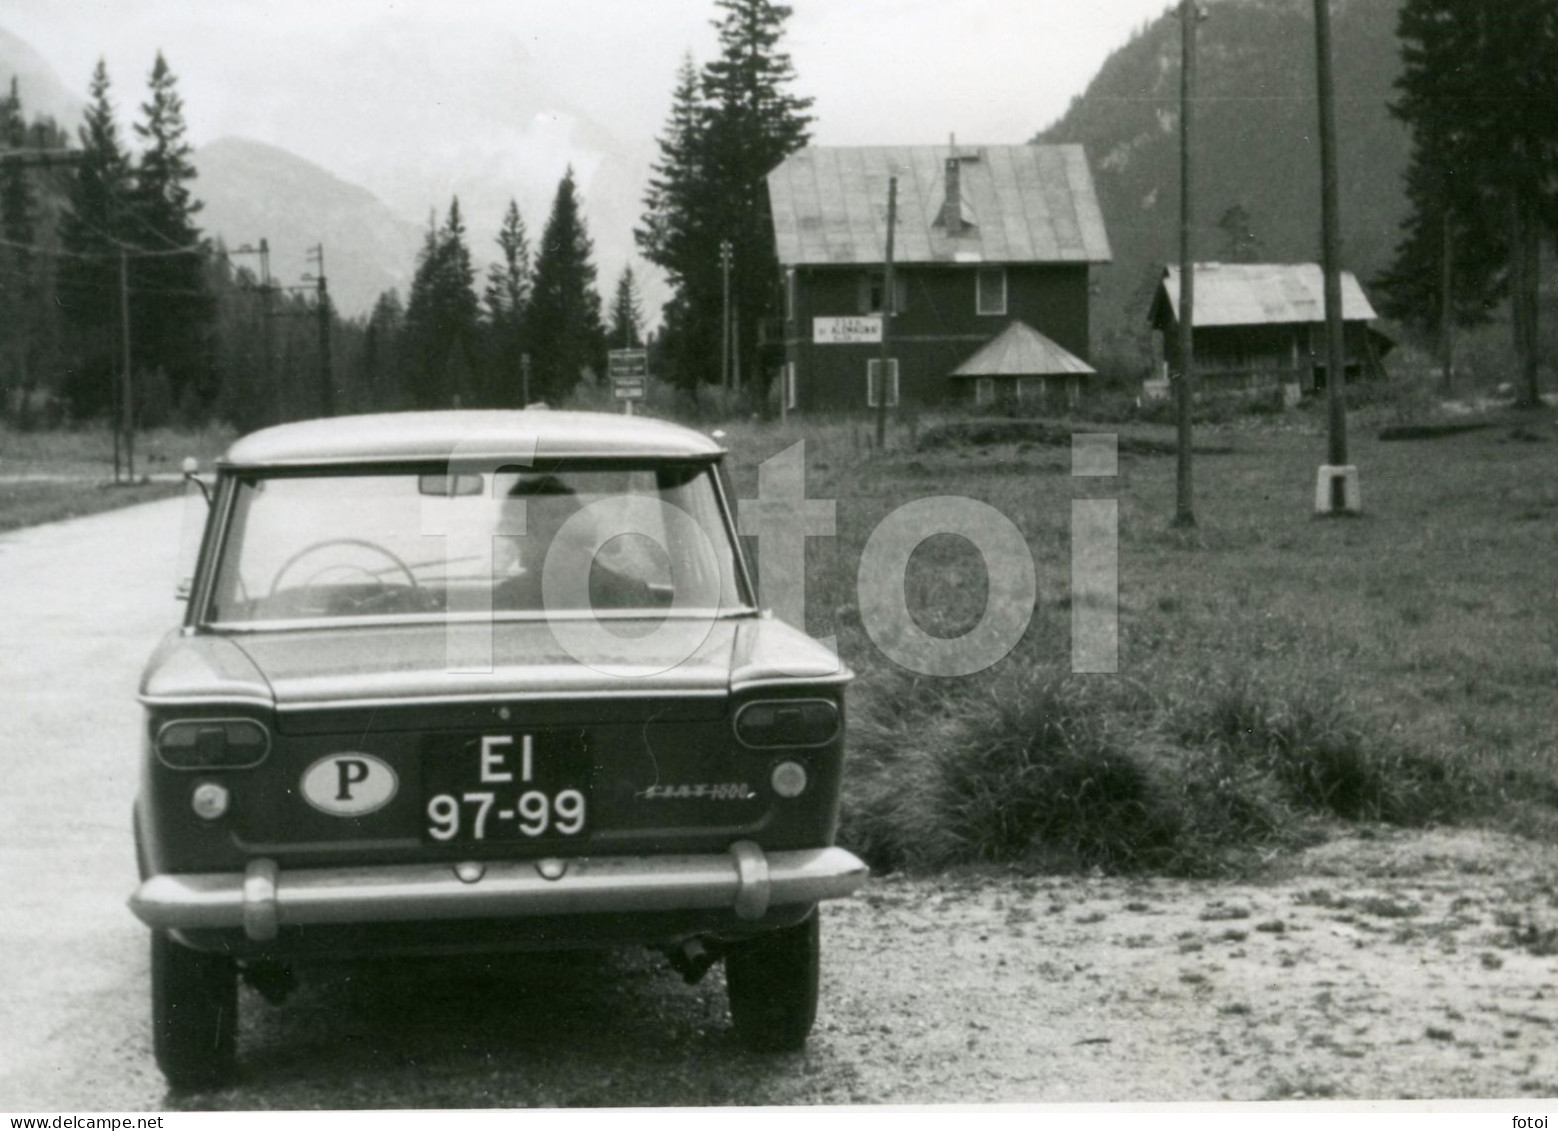 1965 REAL PHOTO FOTO FIAT 1500 CAR TRAVELLING EUROPE DEUTSCHLAND AT155 - Automobile